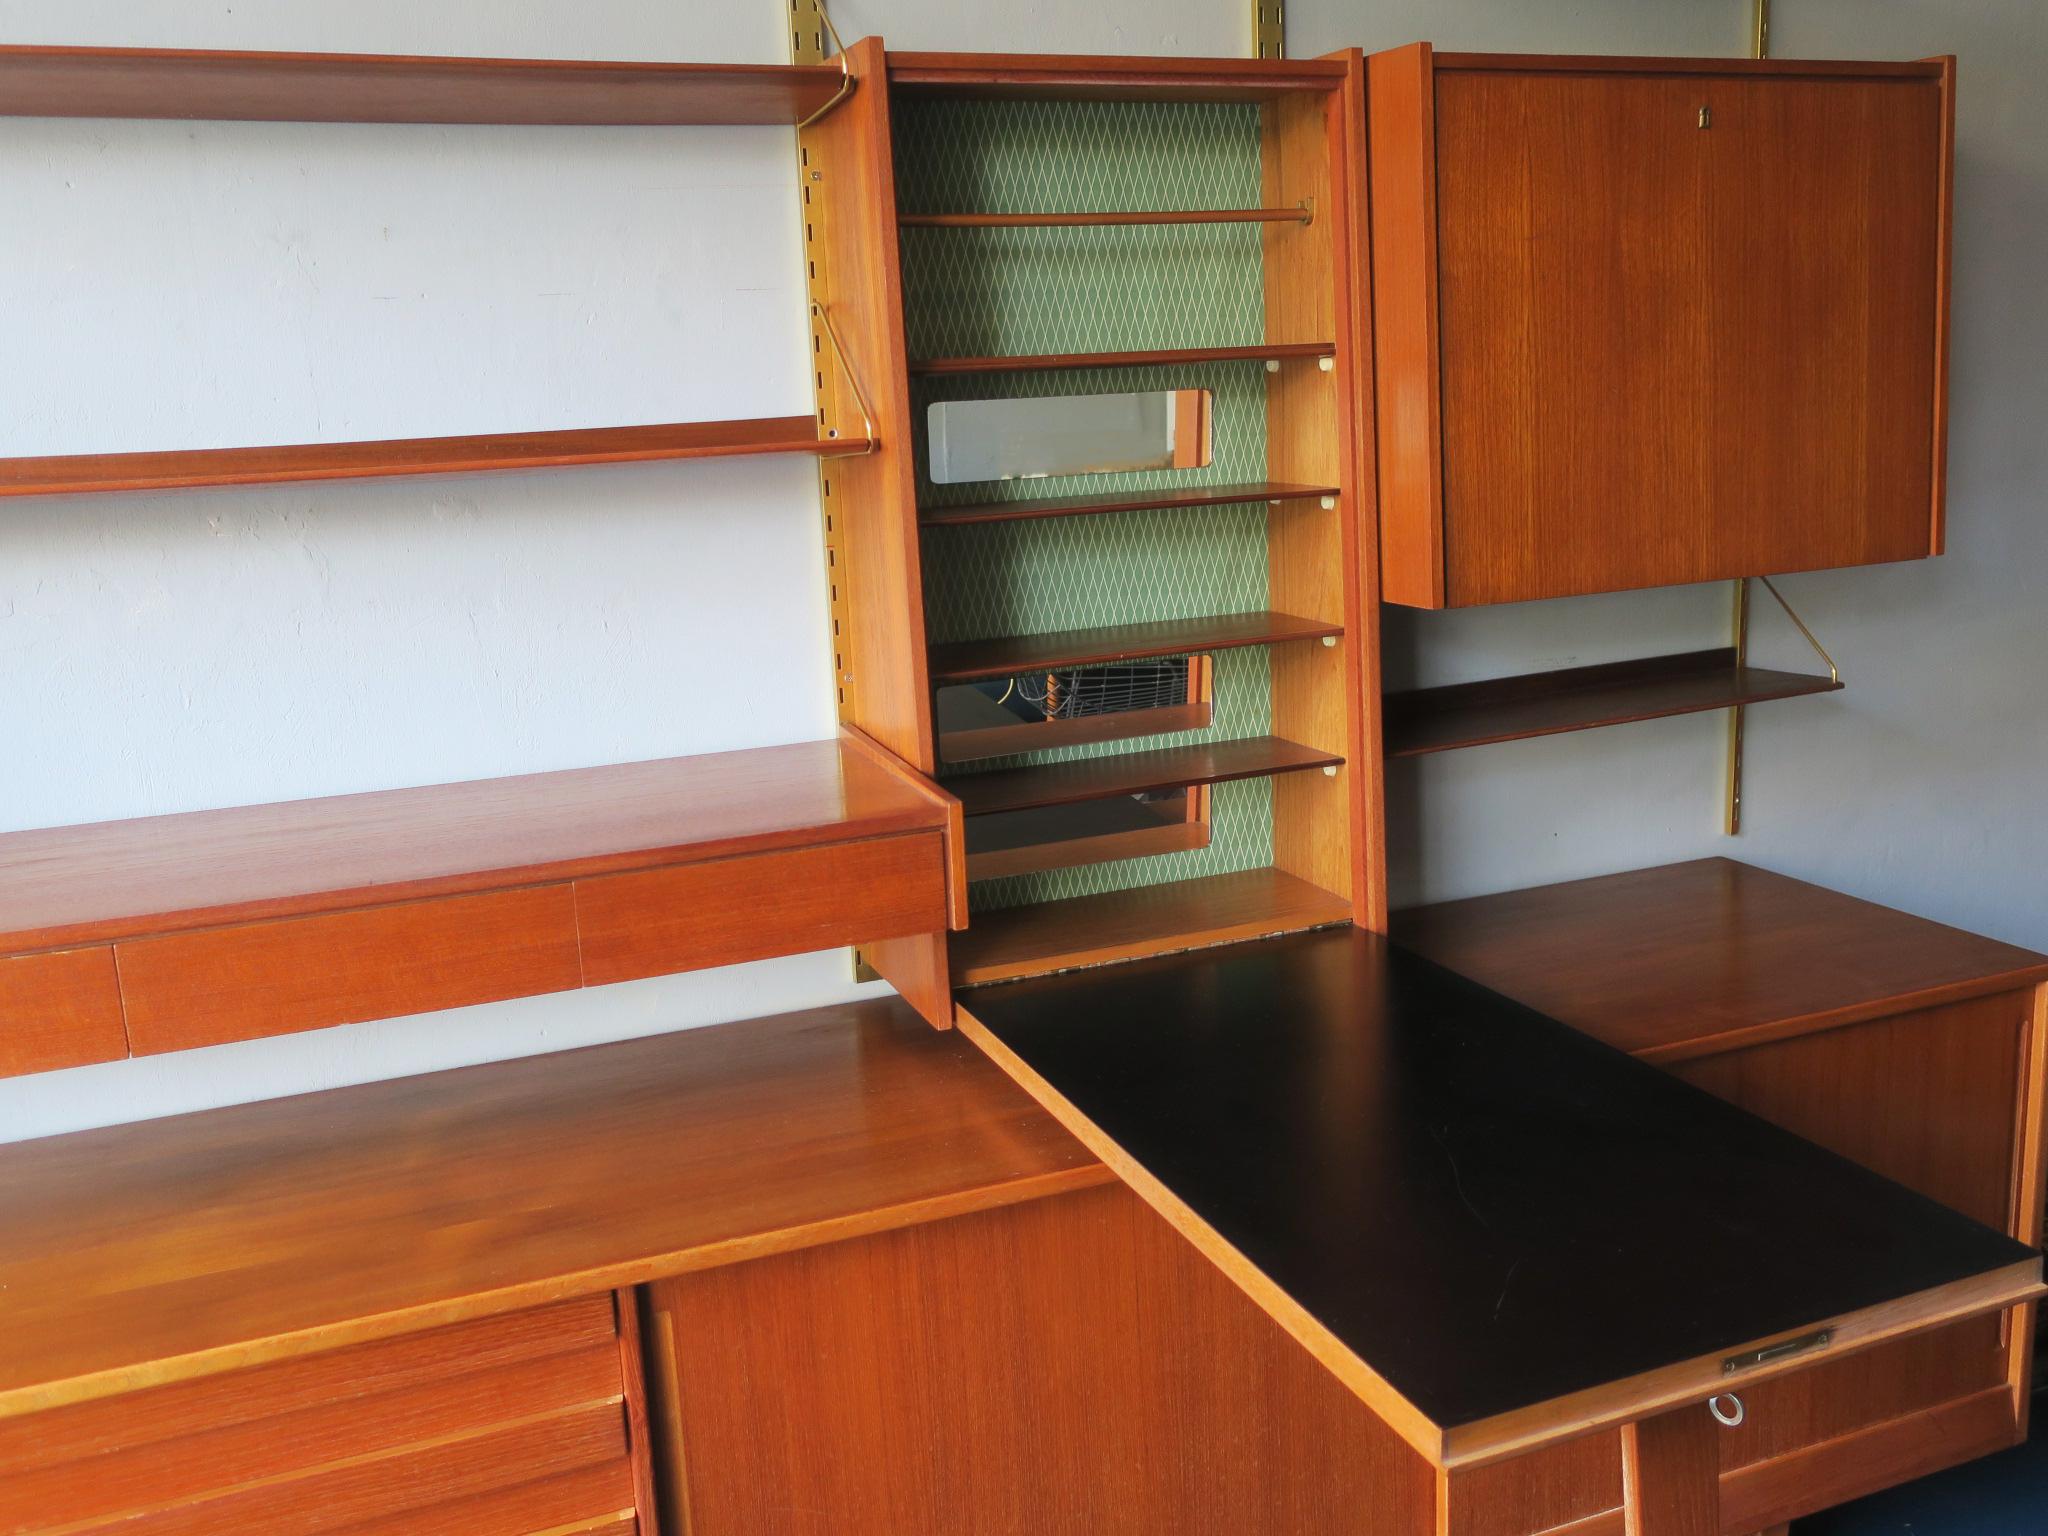 Midcentury Teak Modular Shelf System with Low Sideboard, 1960s For Sale 1